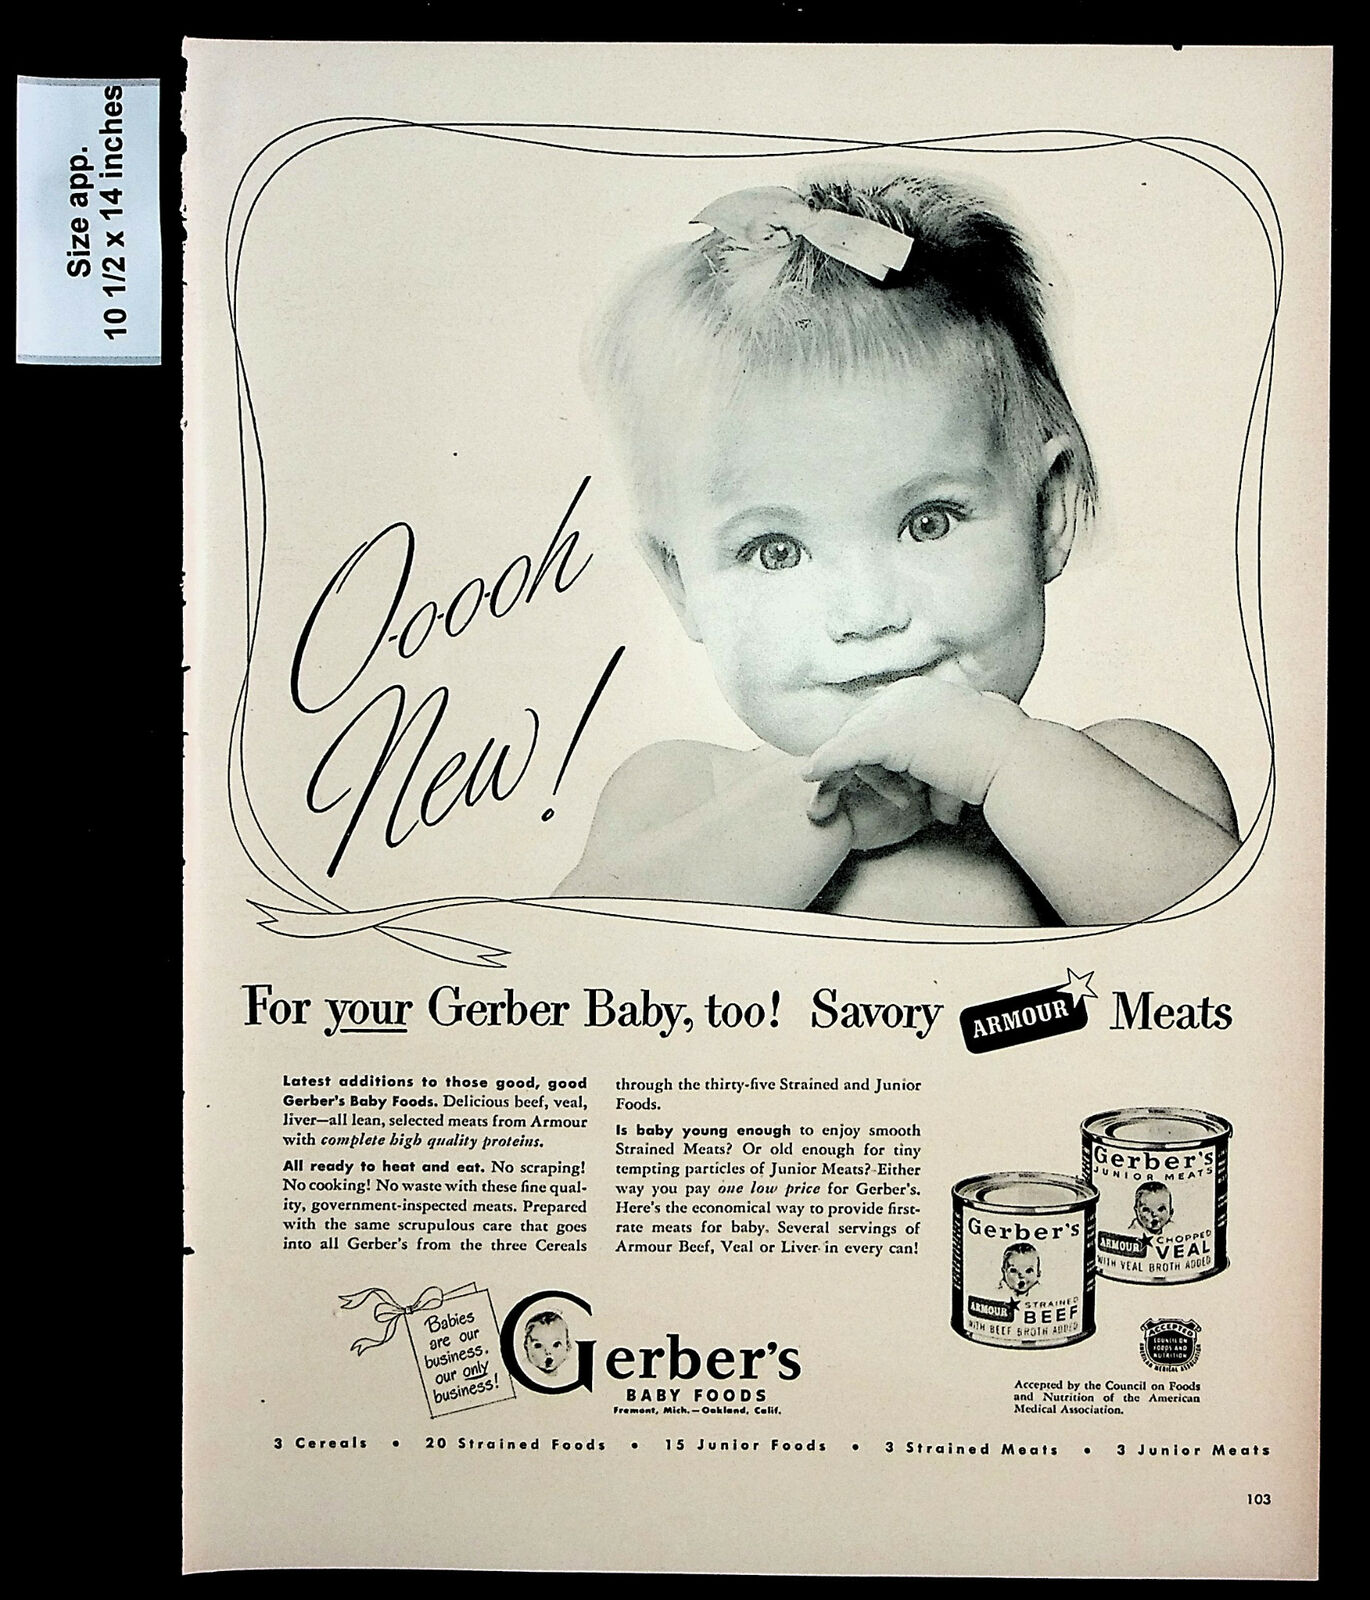 1948 Gerber's Baby Foods Savory Armour Meats Cute Baby Vintage Print Ad 28250